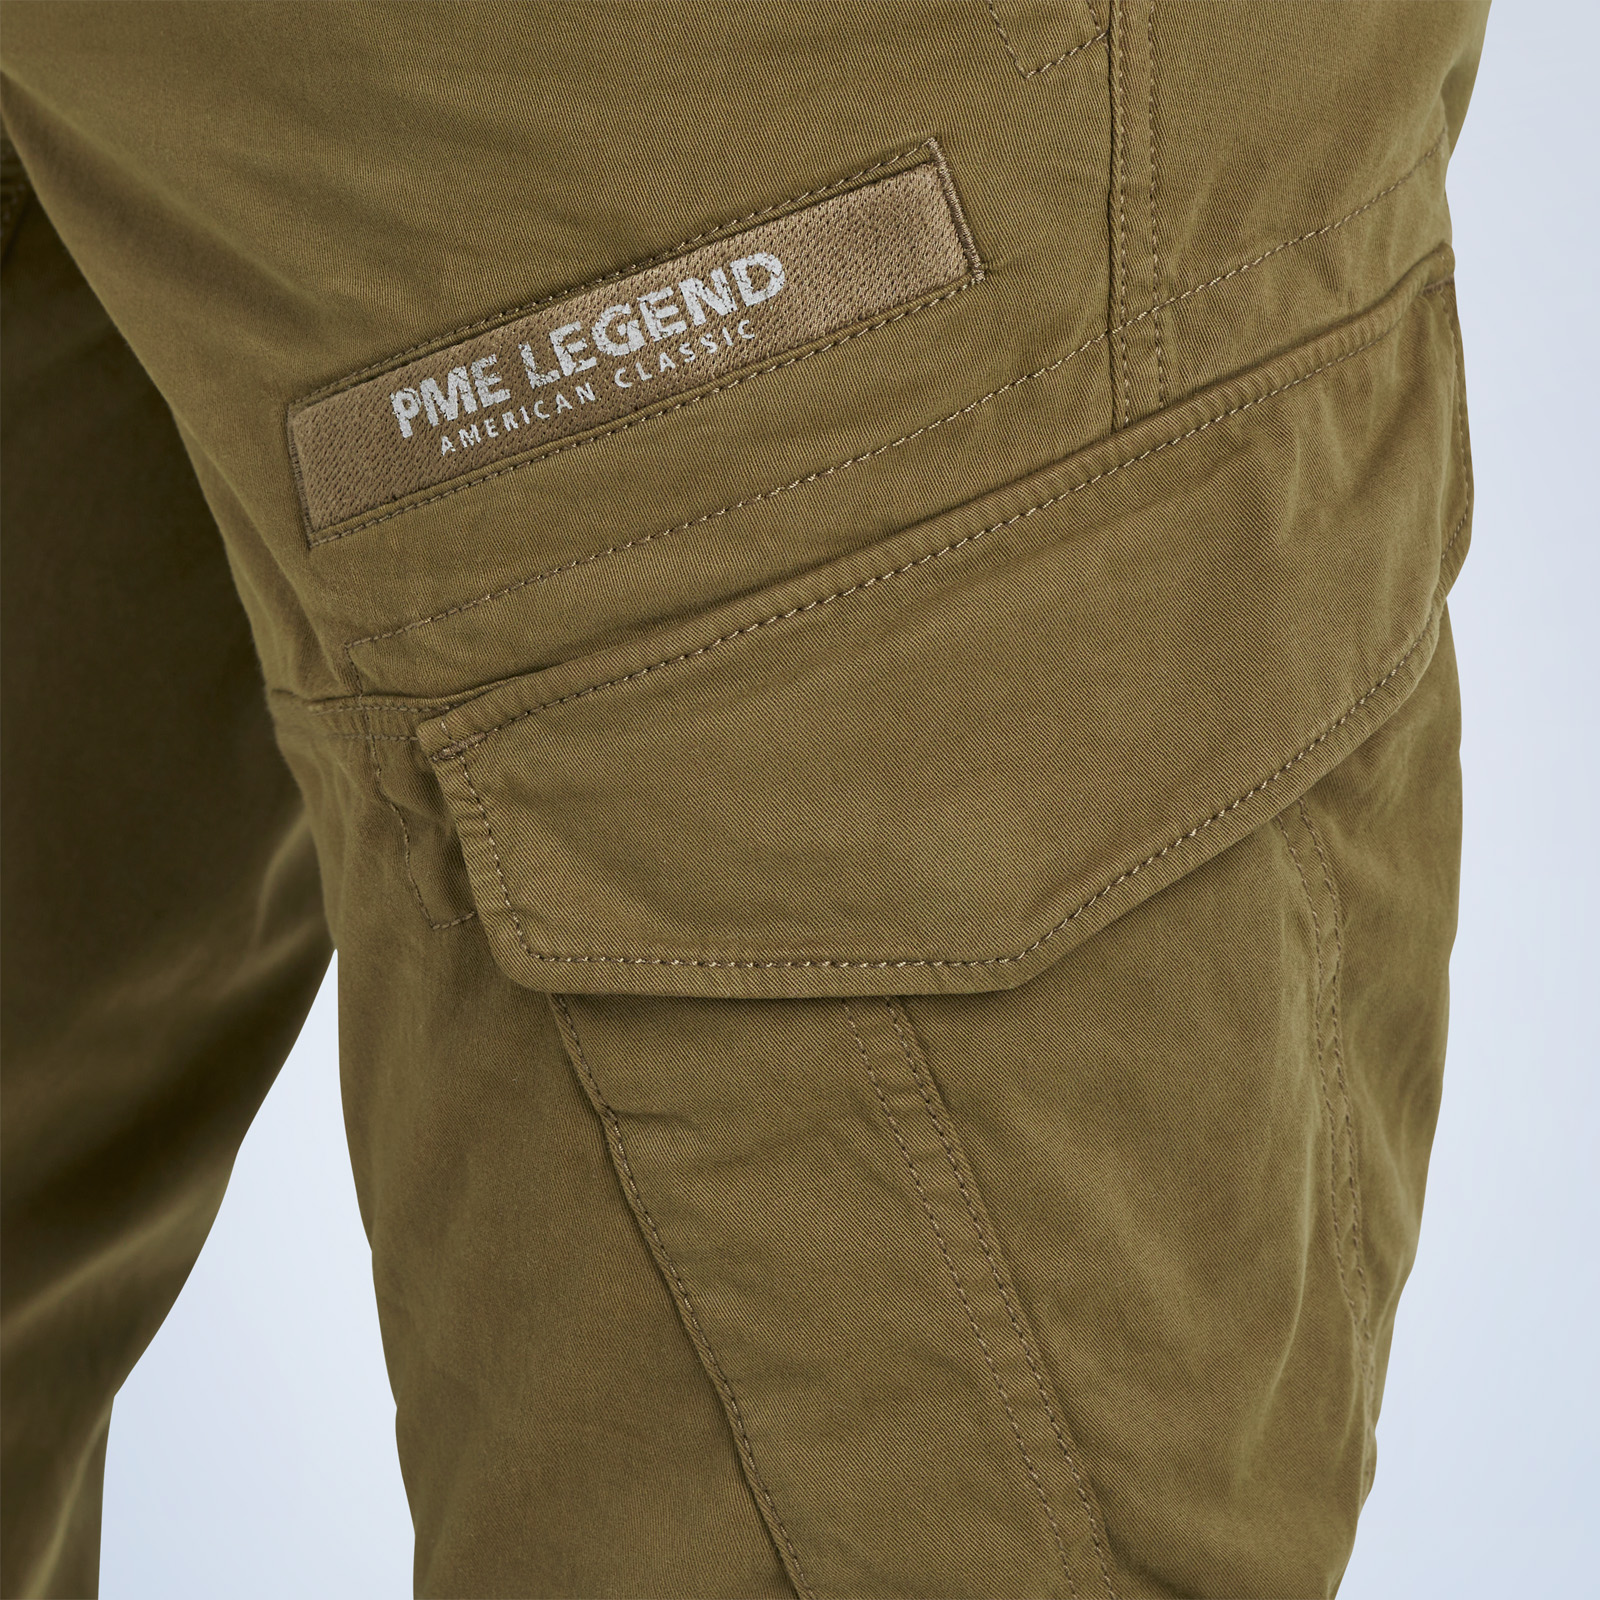 PME LEGEND returns pants fit Free | Nordrop shipping and cargo tapered |